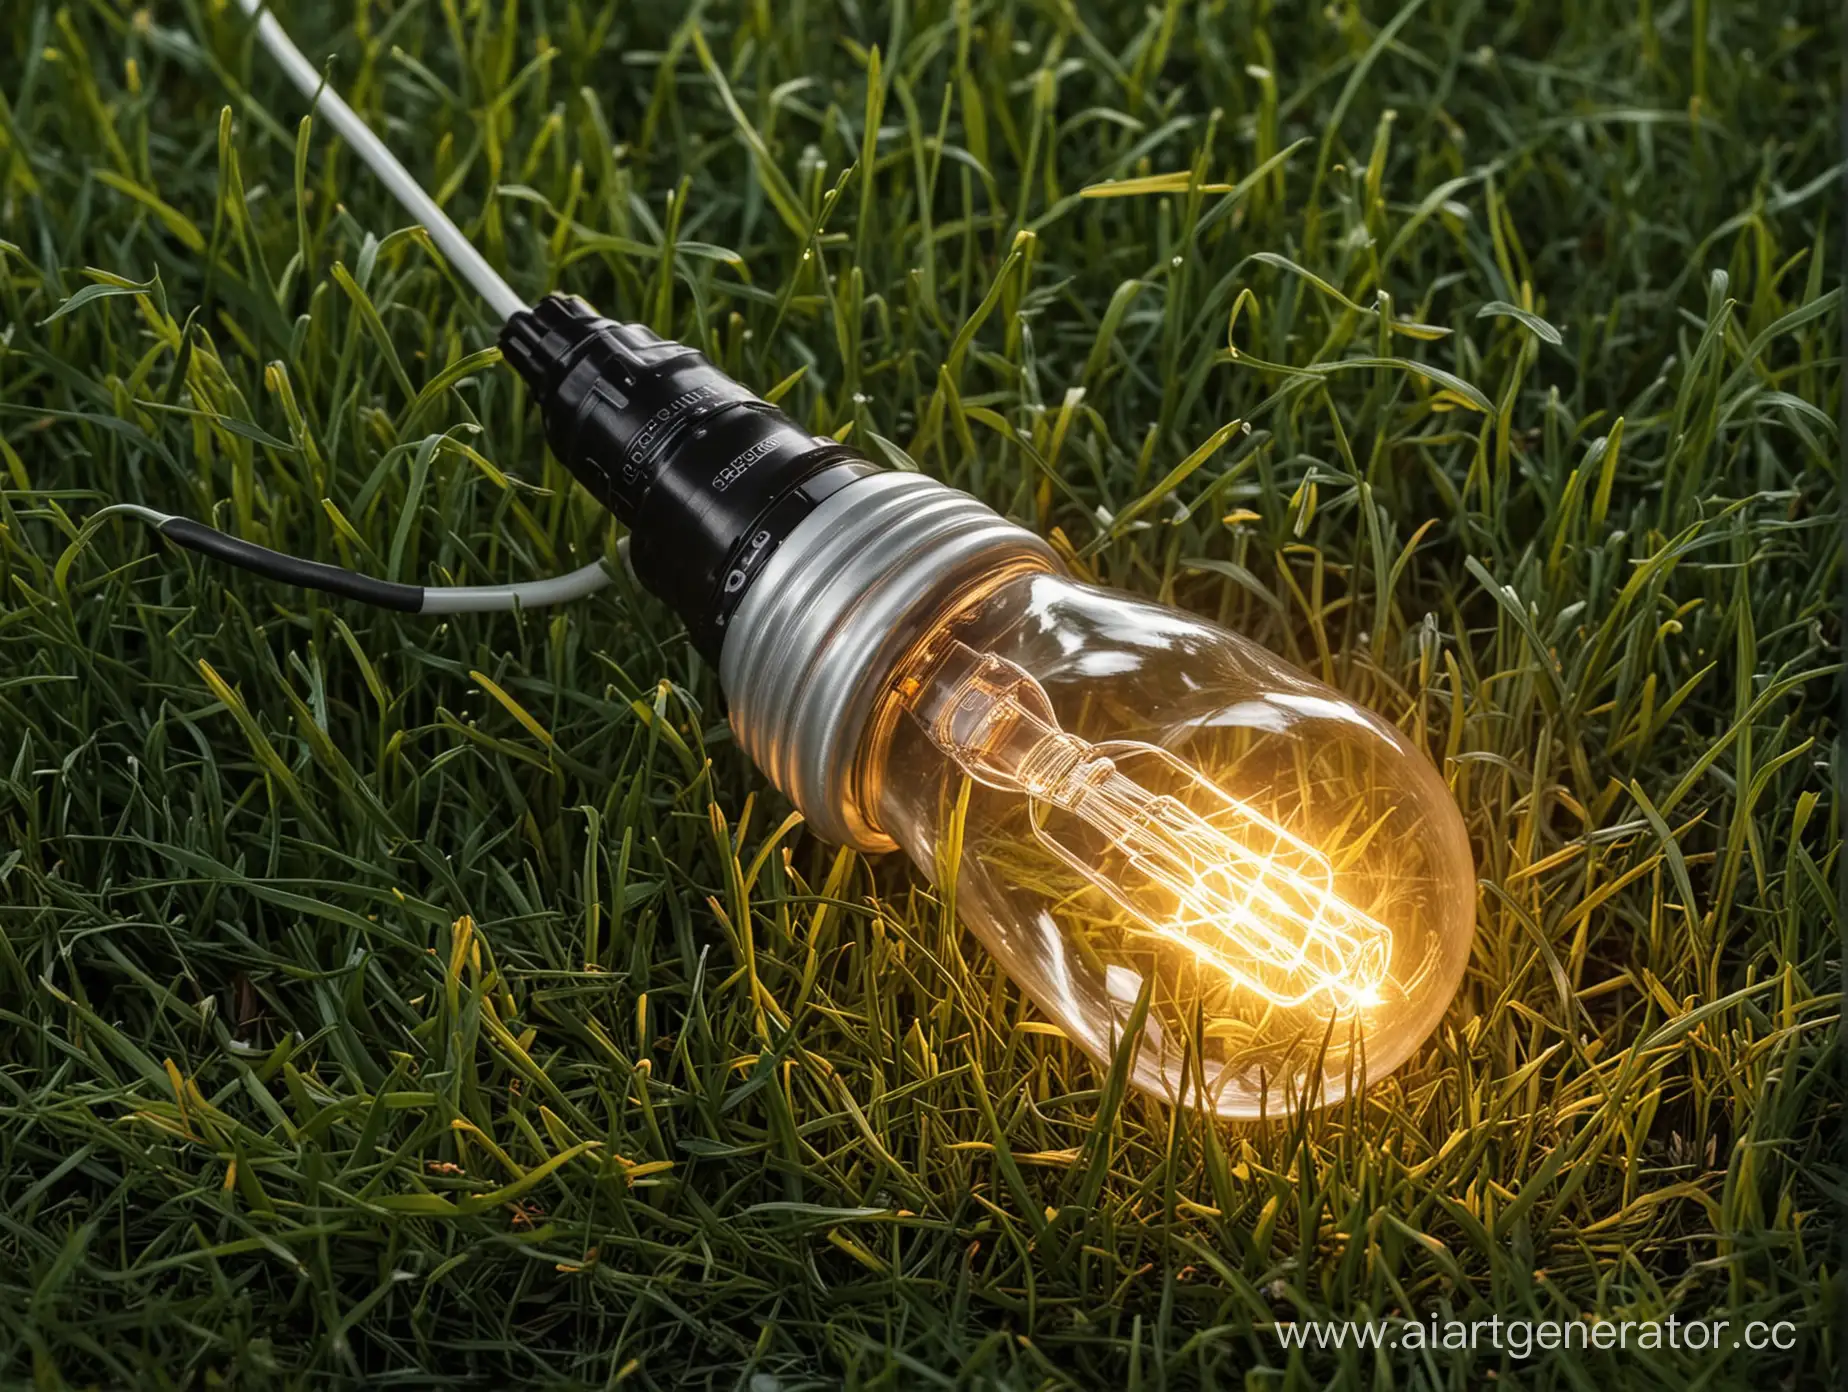 Illuminated-Light-Bulb-in-Grass-with-Electric-Wire